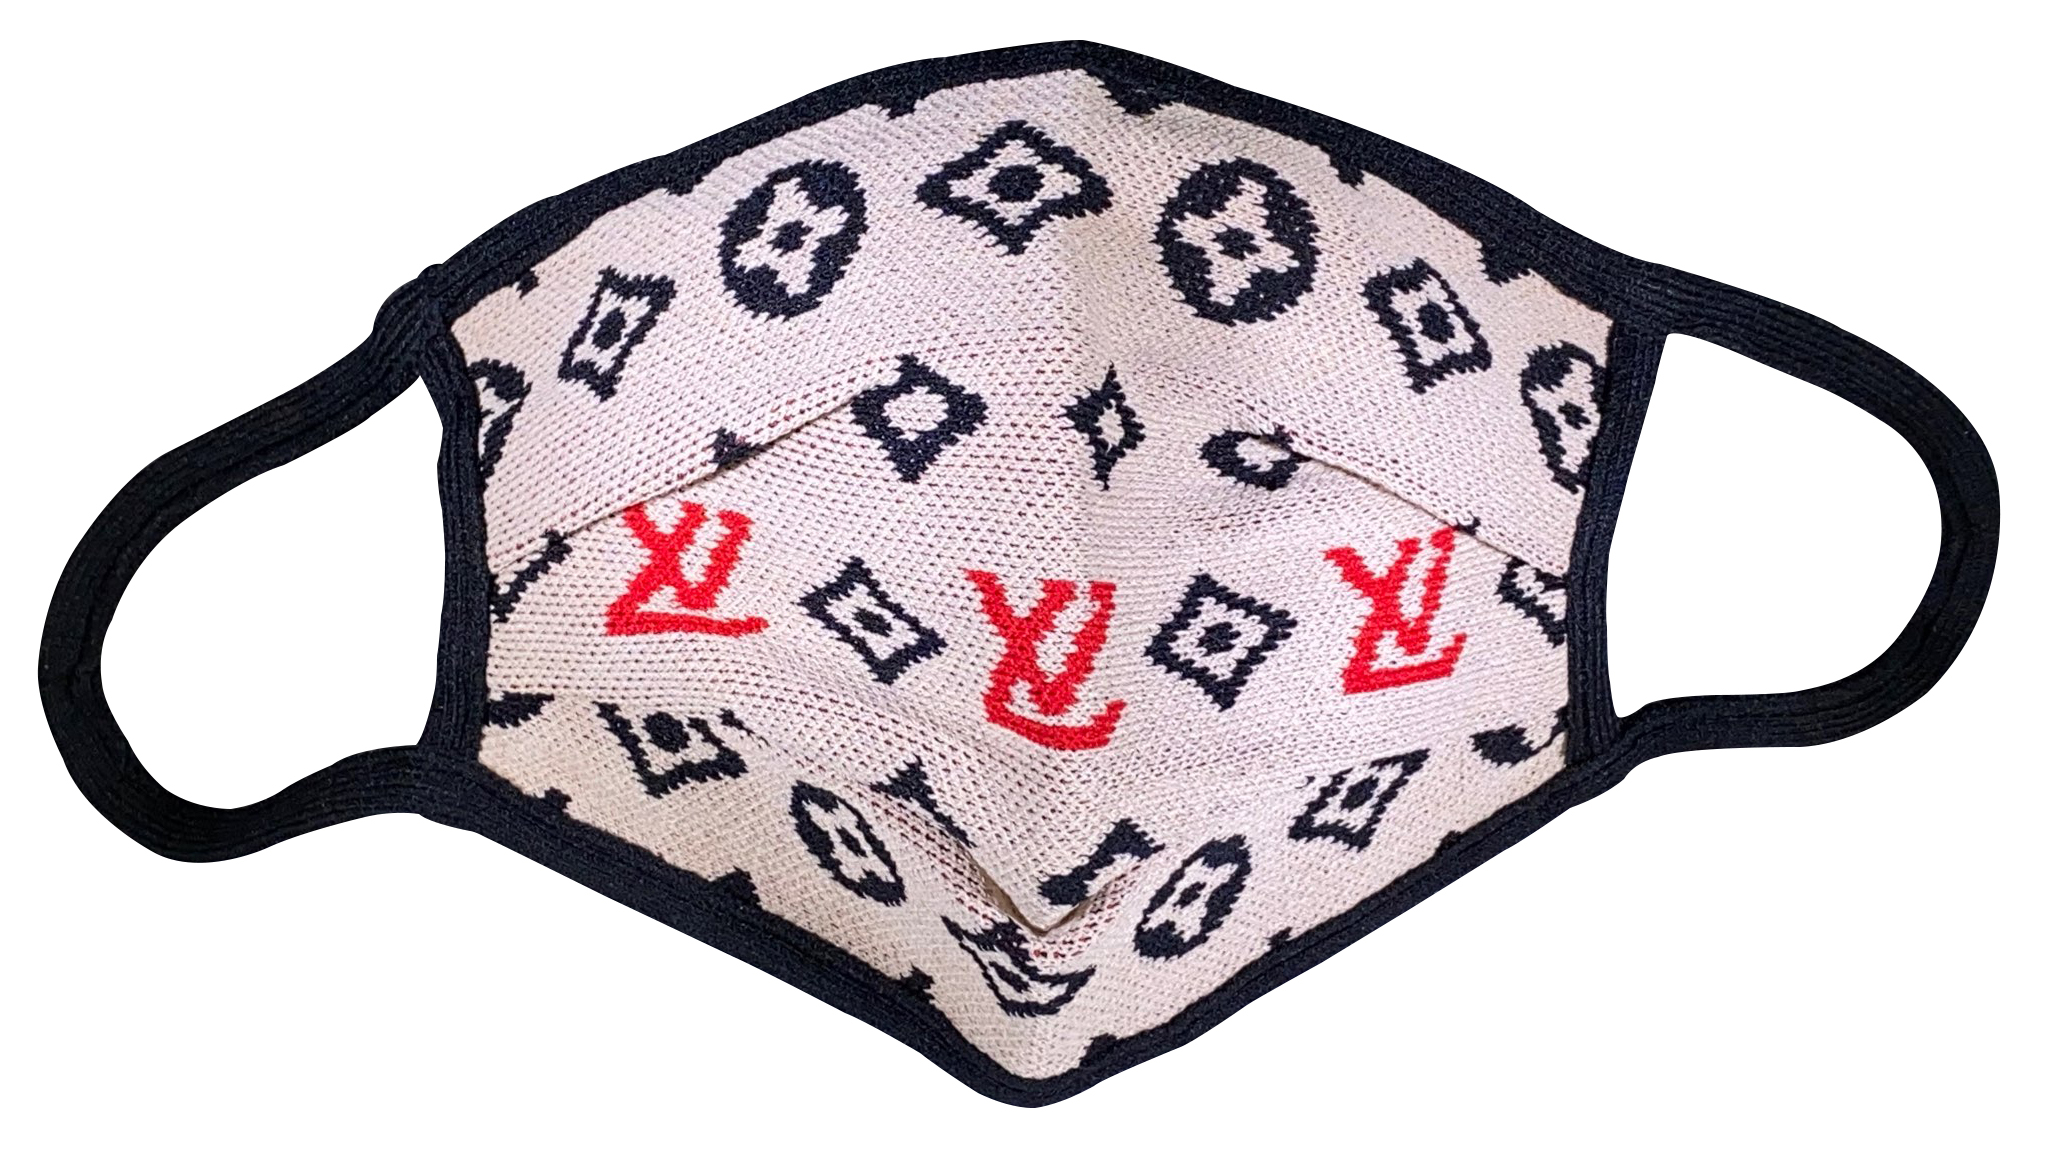 Personal Shopper on X: Louis Vuitton Knit Face Mask have been out of stock  for months but Opulent Styling delivers client request. #louisvuitton  #lvfacemask #knitfacemask #facemask #fashionfacemask #clothingbrand  #vipconcierge #imageconsultant https